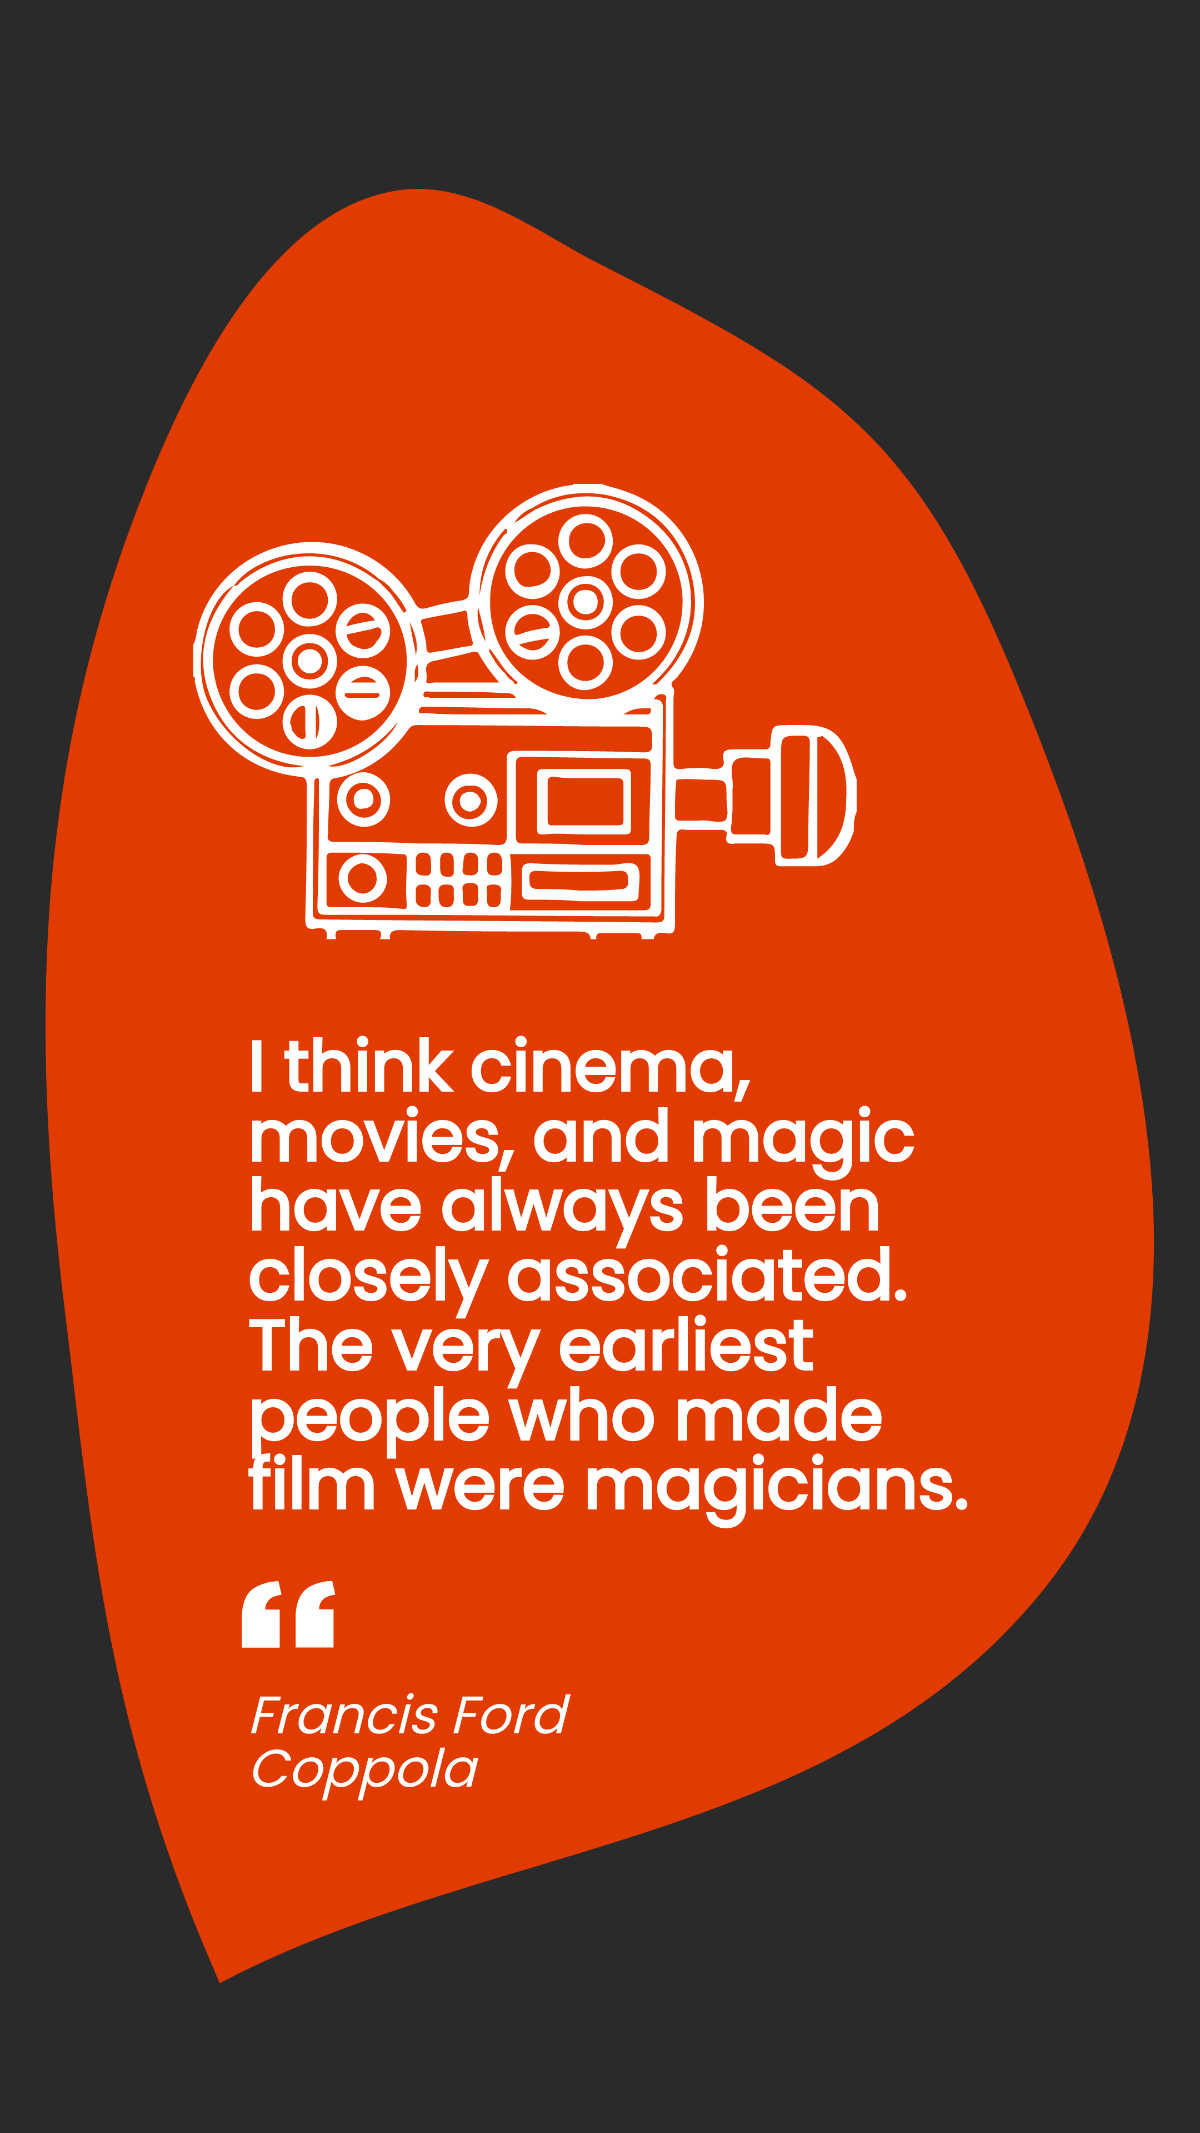 Free Francis Ford Coppola - I think cinema, movies, and magic have always been closely associated. The very earliest people who made film were magicians. Template